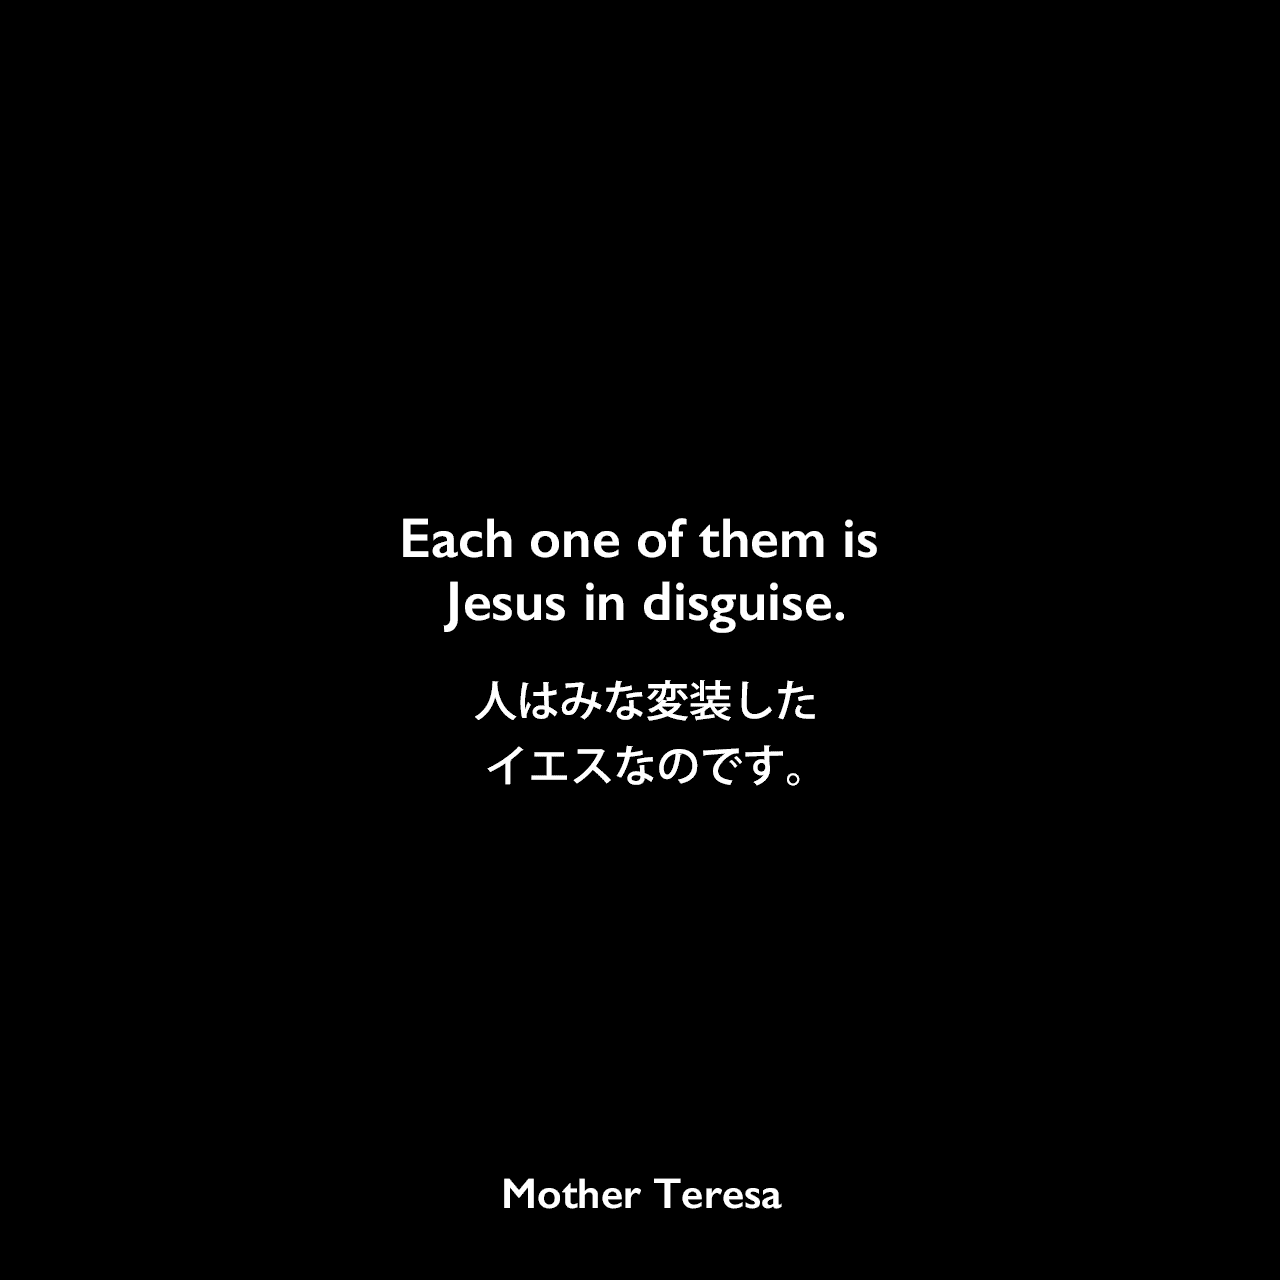 Each one of them is Jesus in disguise.人はみな変装したイエスなのです。Mother Teresa